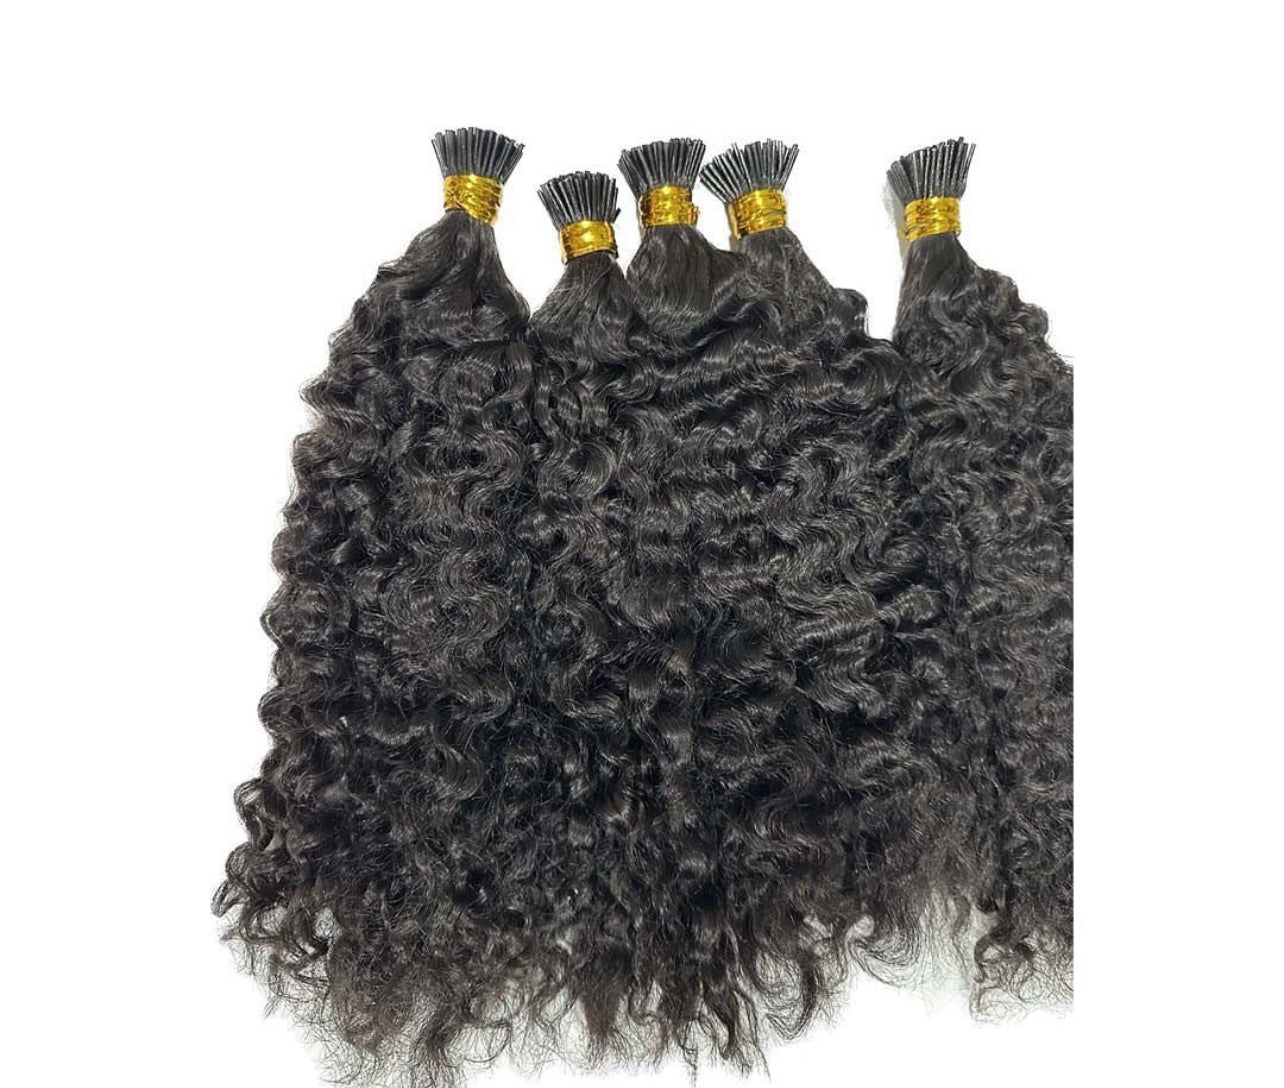 Burmese Curly Extensions